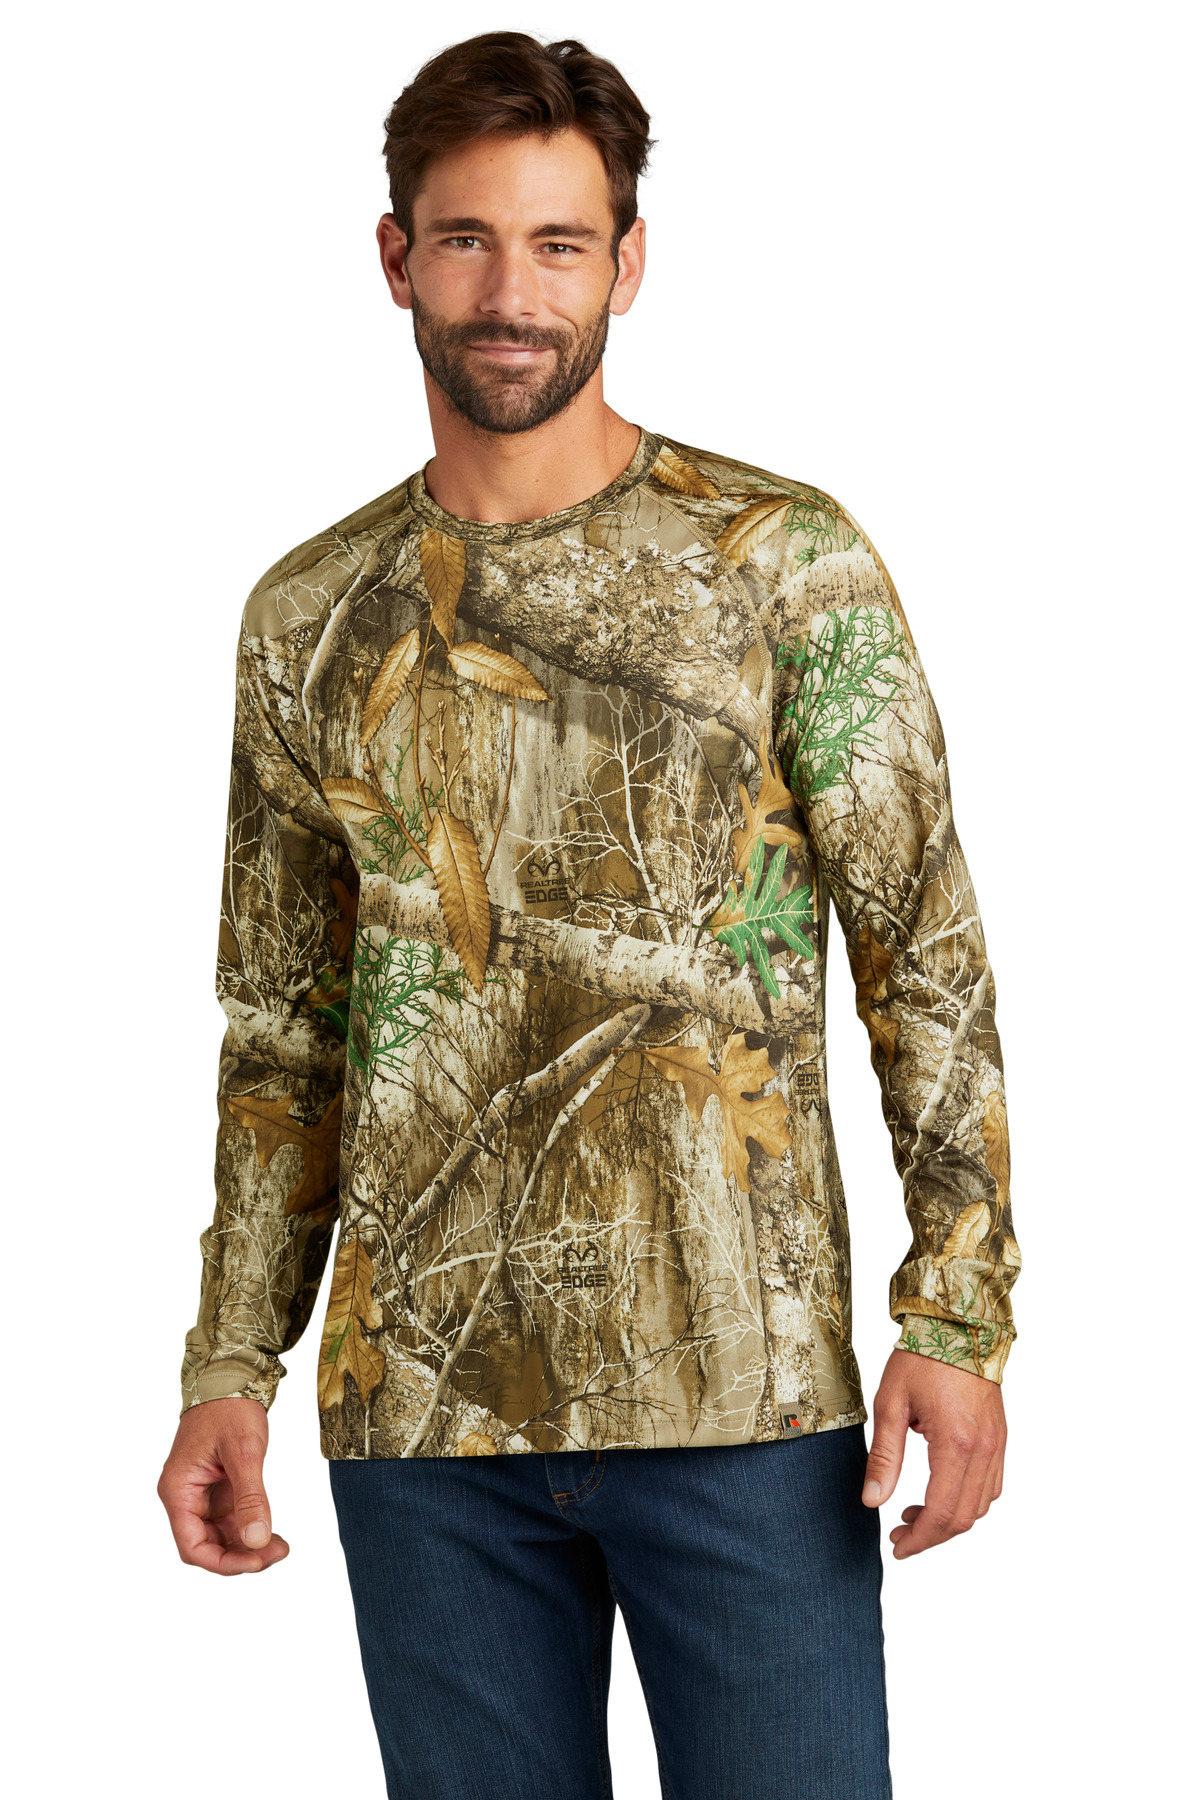 Russell Outdoors Realtree Performance Long Sleeve Tee-Russell Outdoors